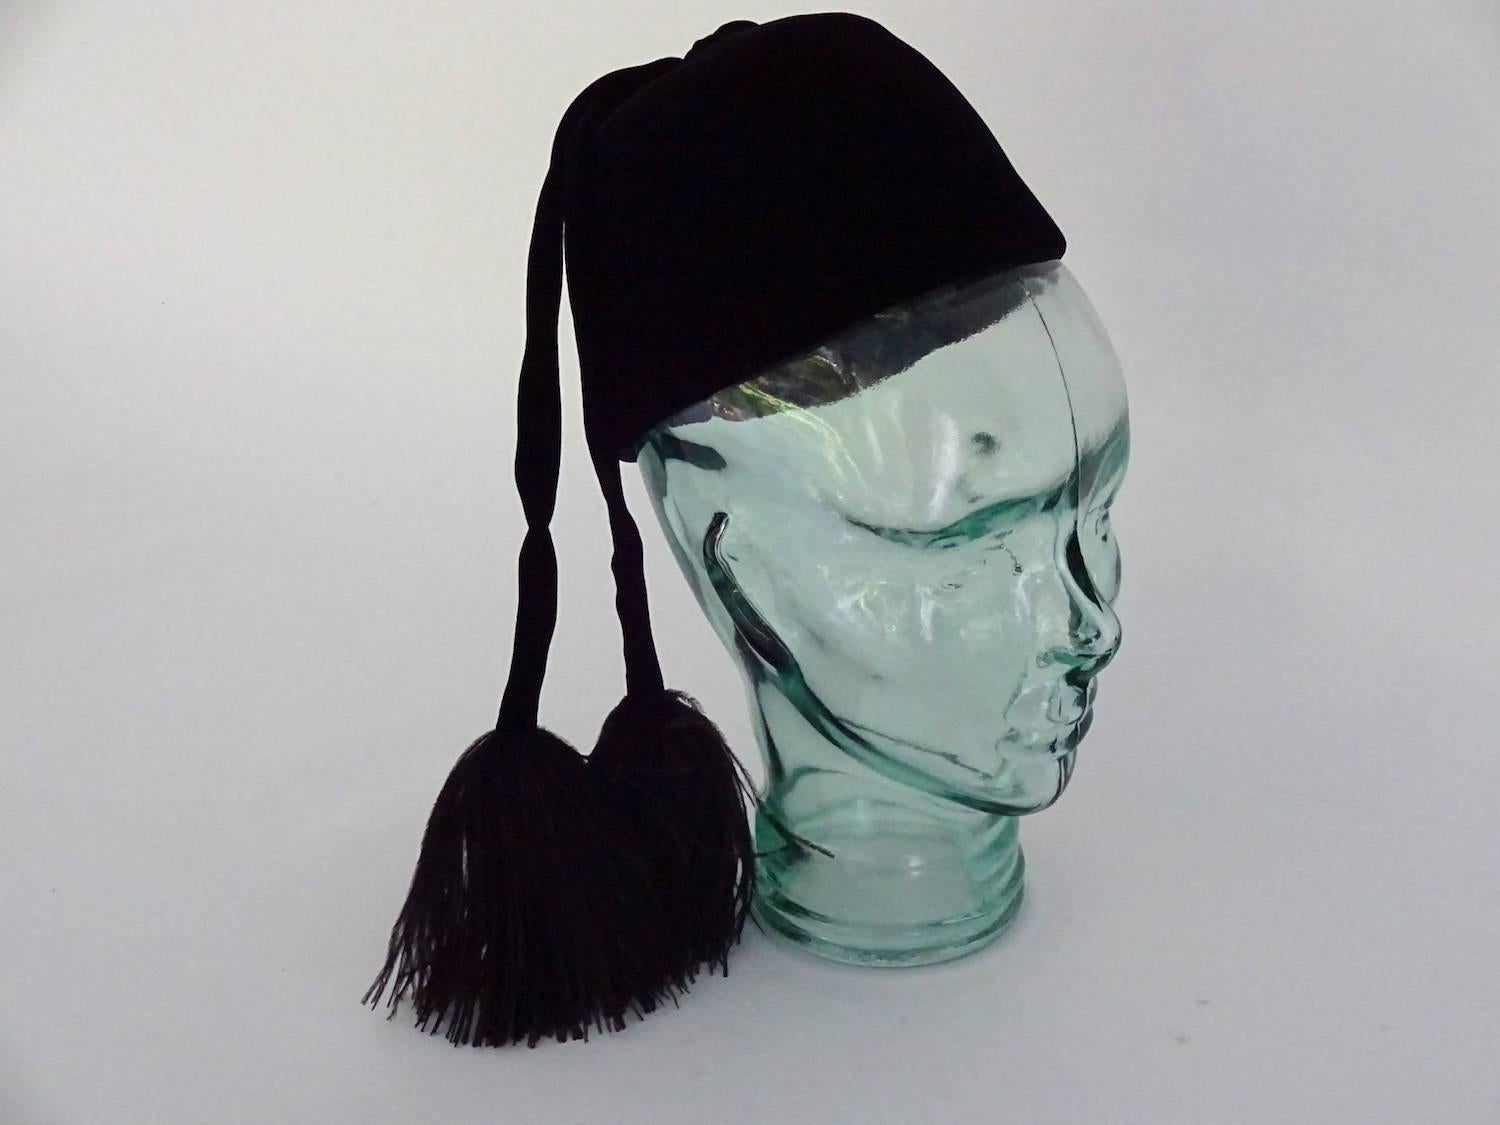 Elegant little black velvet vintage evening toque by Jean Patou with velvet tassels ending in marabou feather trim, circa 1960. Worn at the back of the
head. Combs inside the hatband to keep it in place. Remarkably good condition no wear at all to